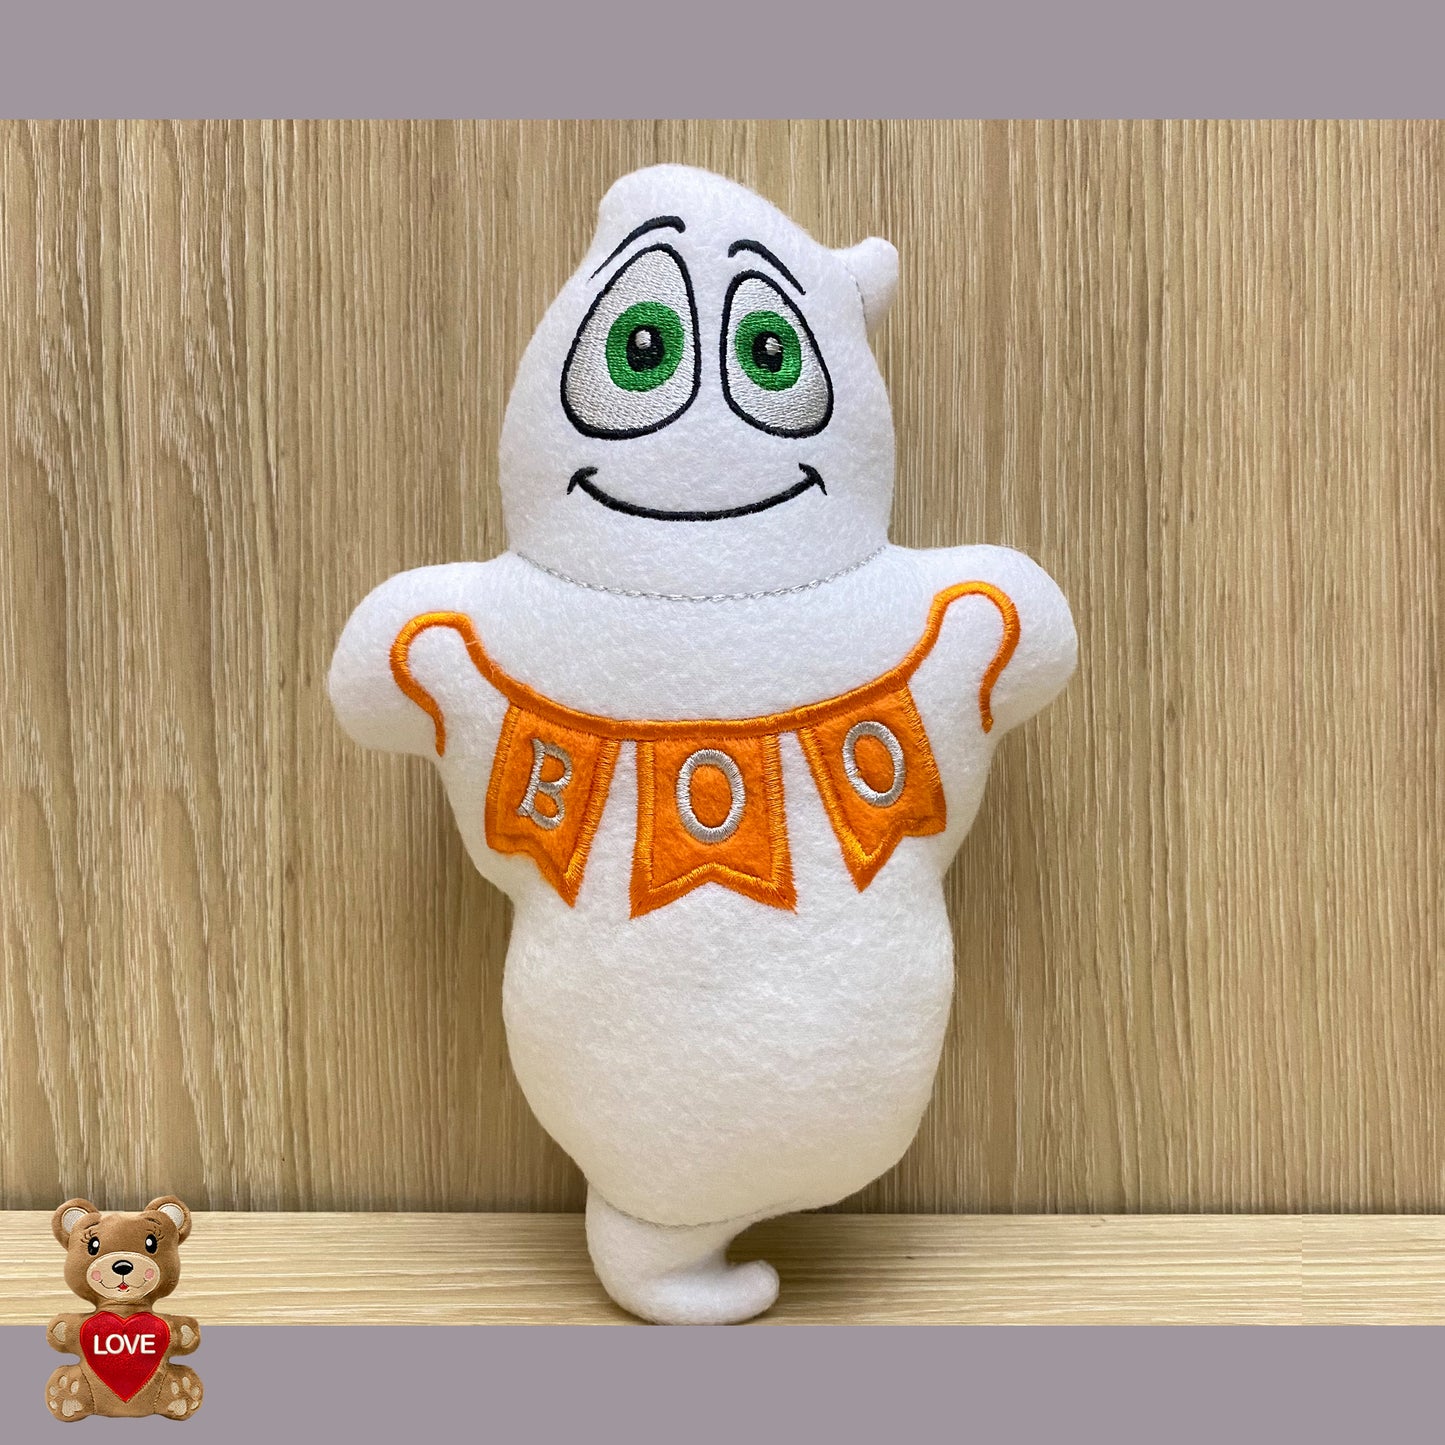 Personalised embroidery Plush Soft Toy Ghost ,Super cute personalised soft plush toy, Personalised Gift, Unique Personalized Birthday Gifts , Custom Gifts For Children